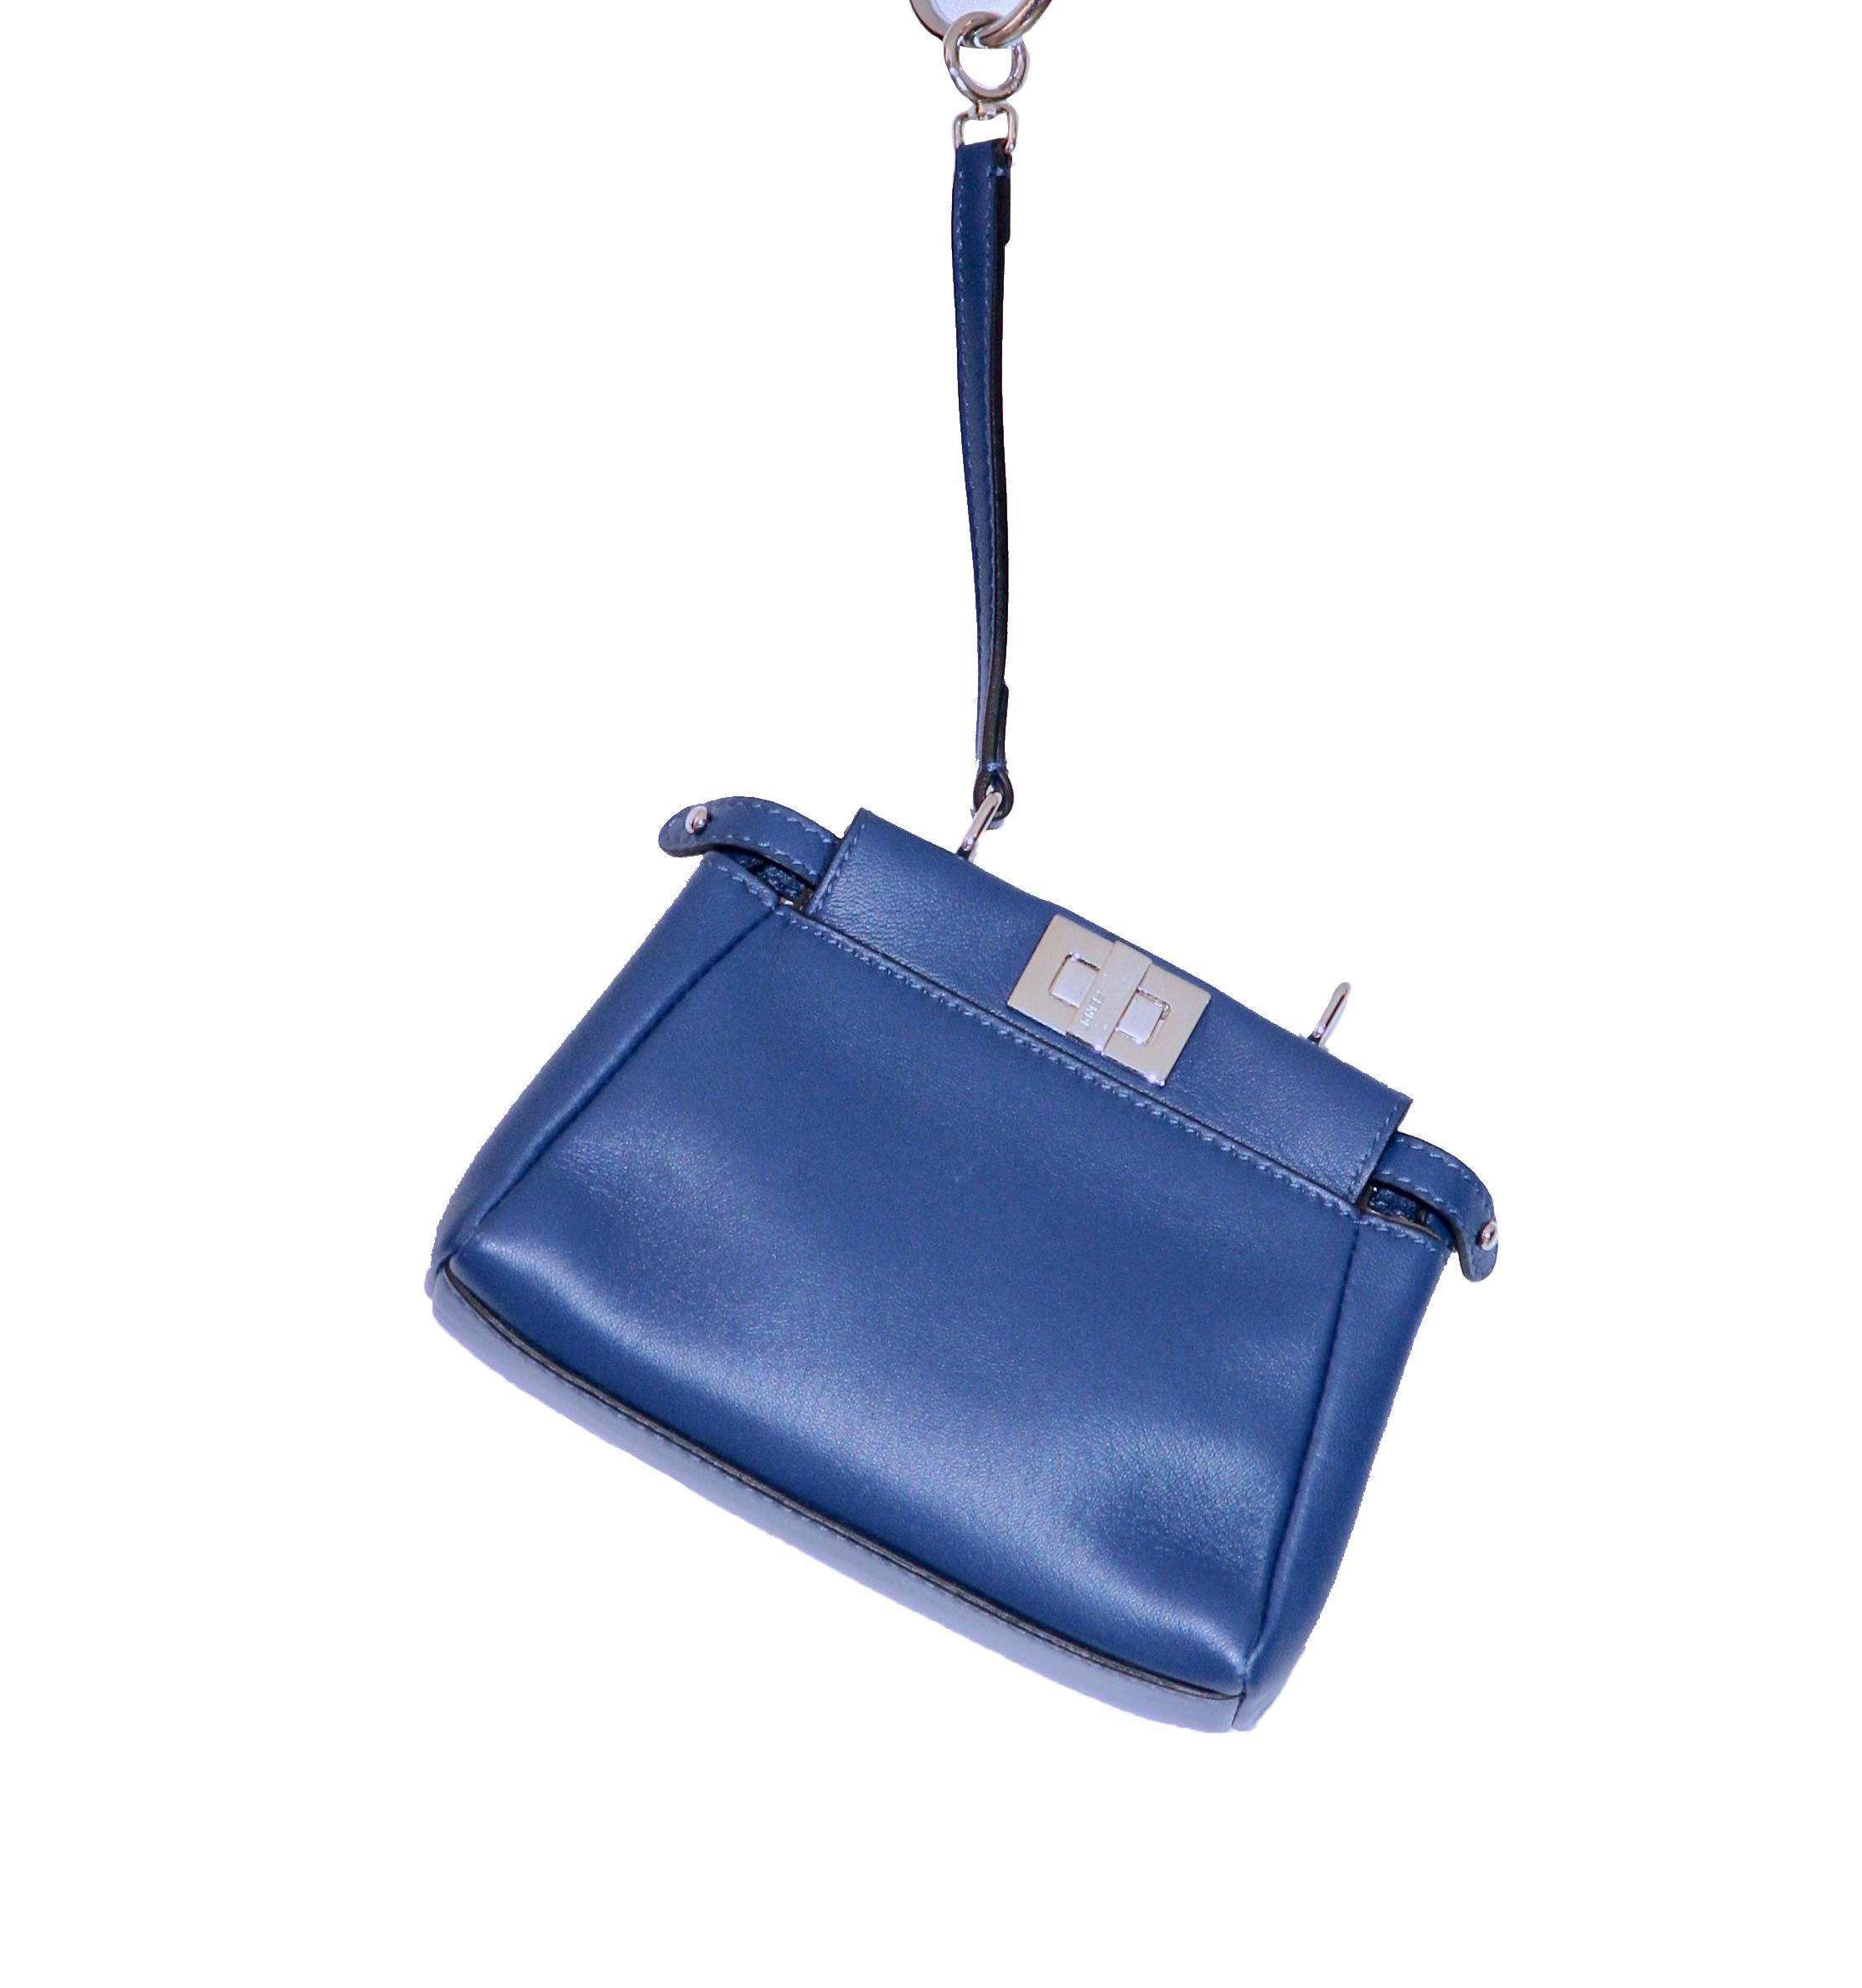 Charming pre-owned Micro Peekaboo bag in a soft blue Nappa leather featuring 2 inner compartments divided by a partition with twist lock and magnetic button. 
Single handle with spring clip on one side and a long thin adjustable, removable shoulder